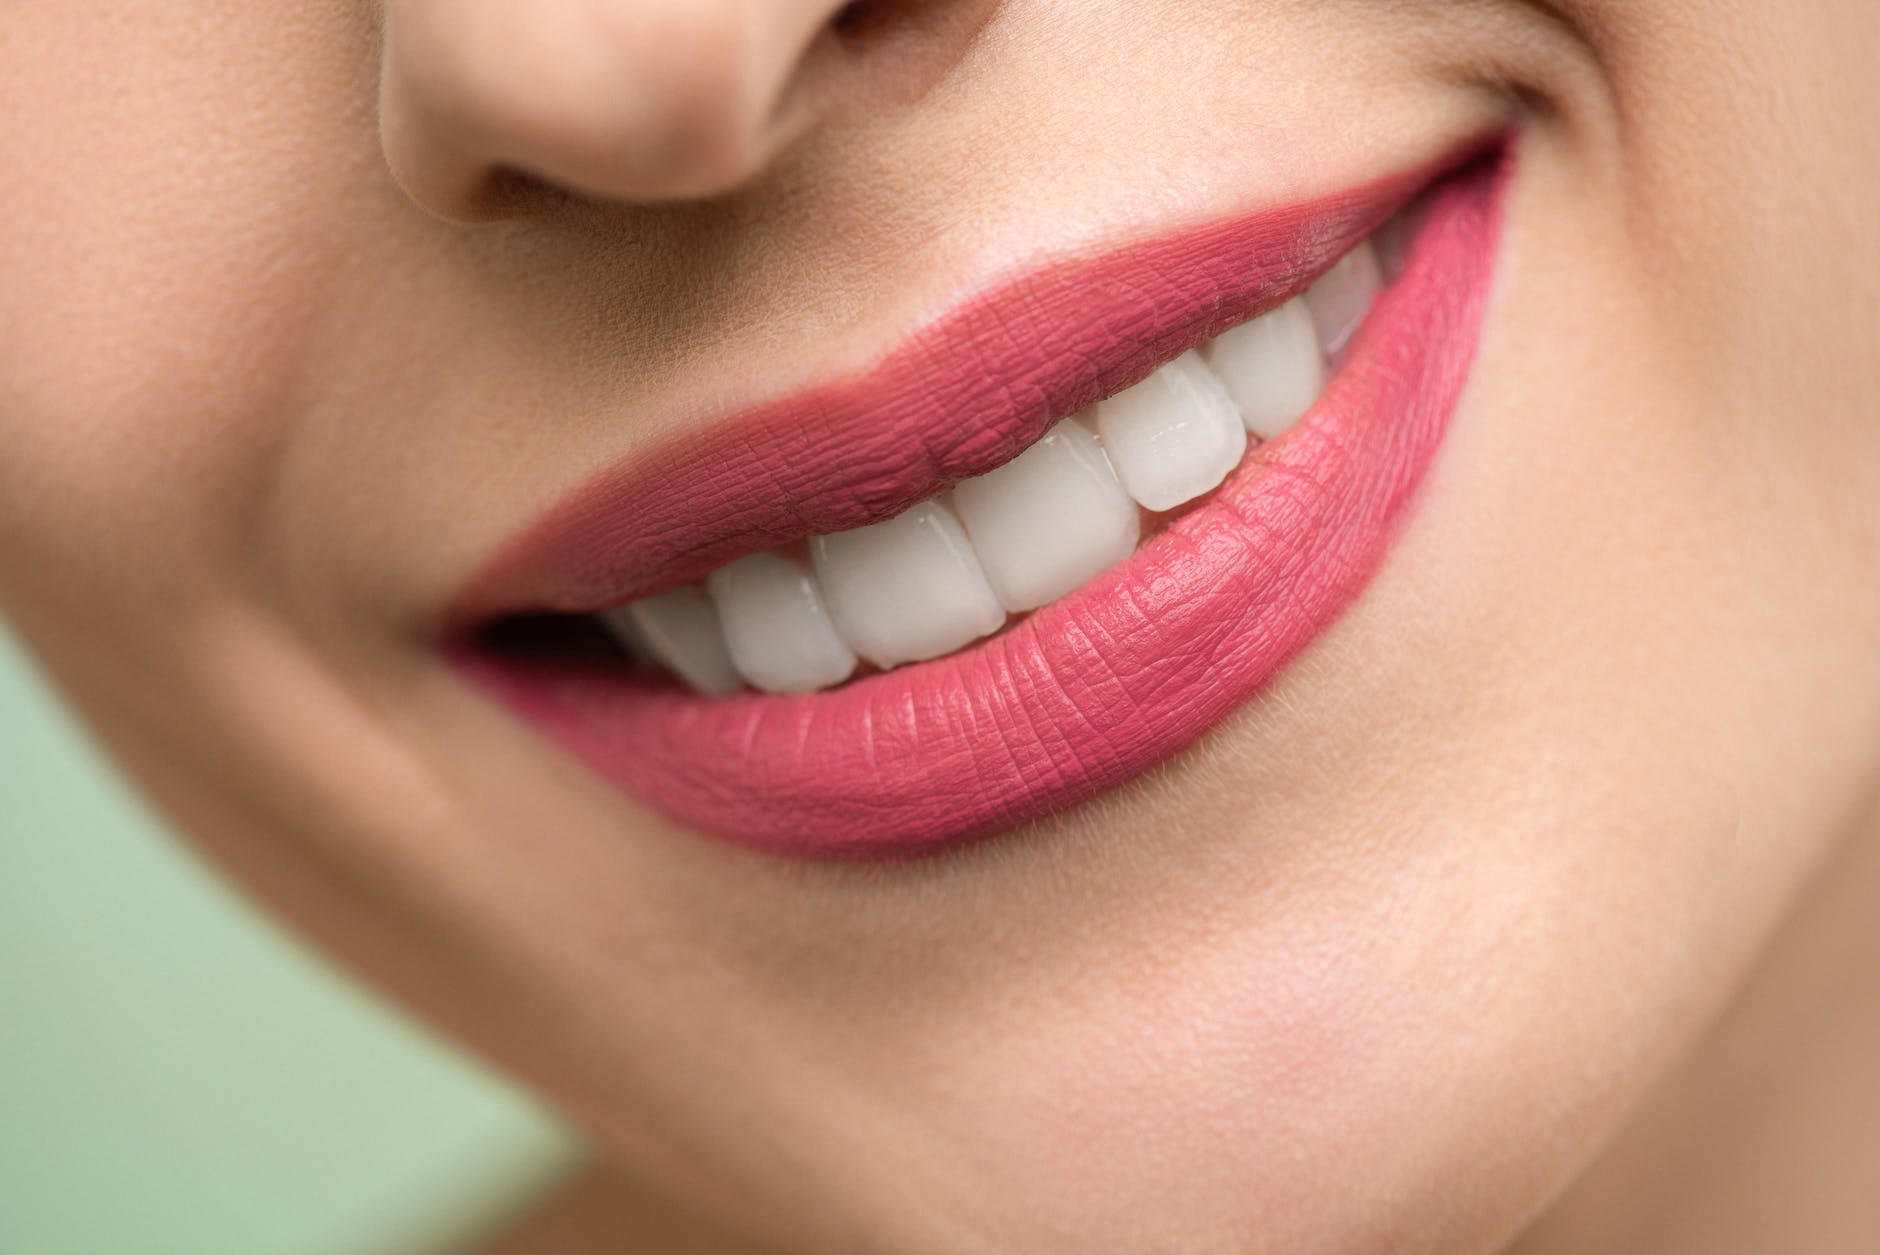 Can you Straighten Your Teeth Without Braces?